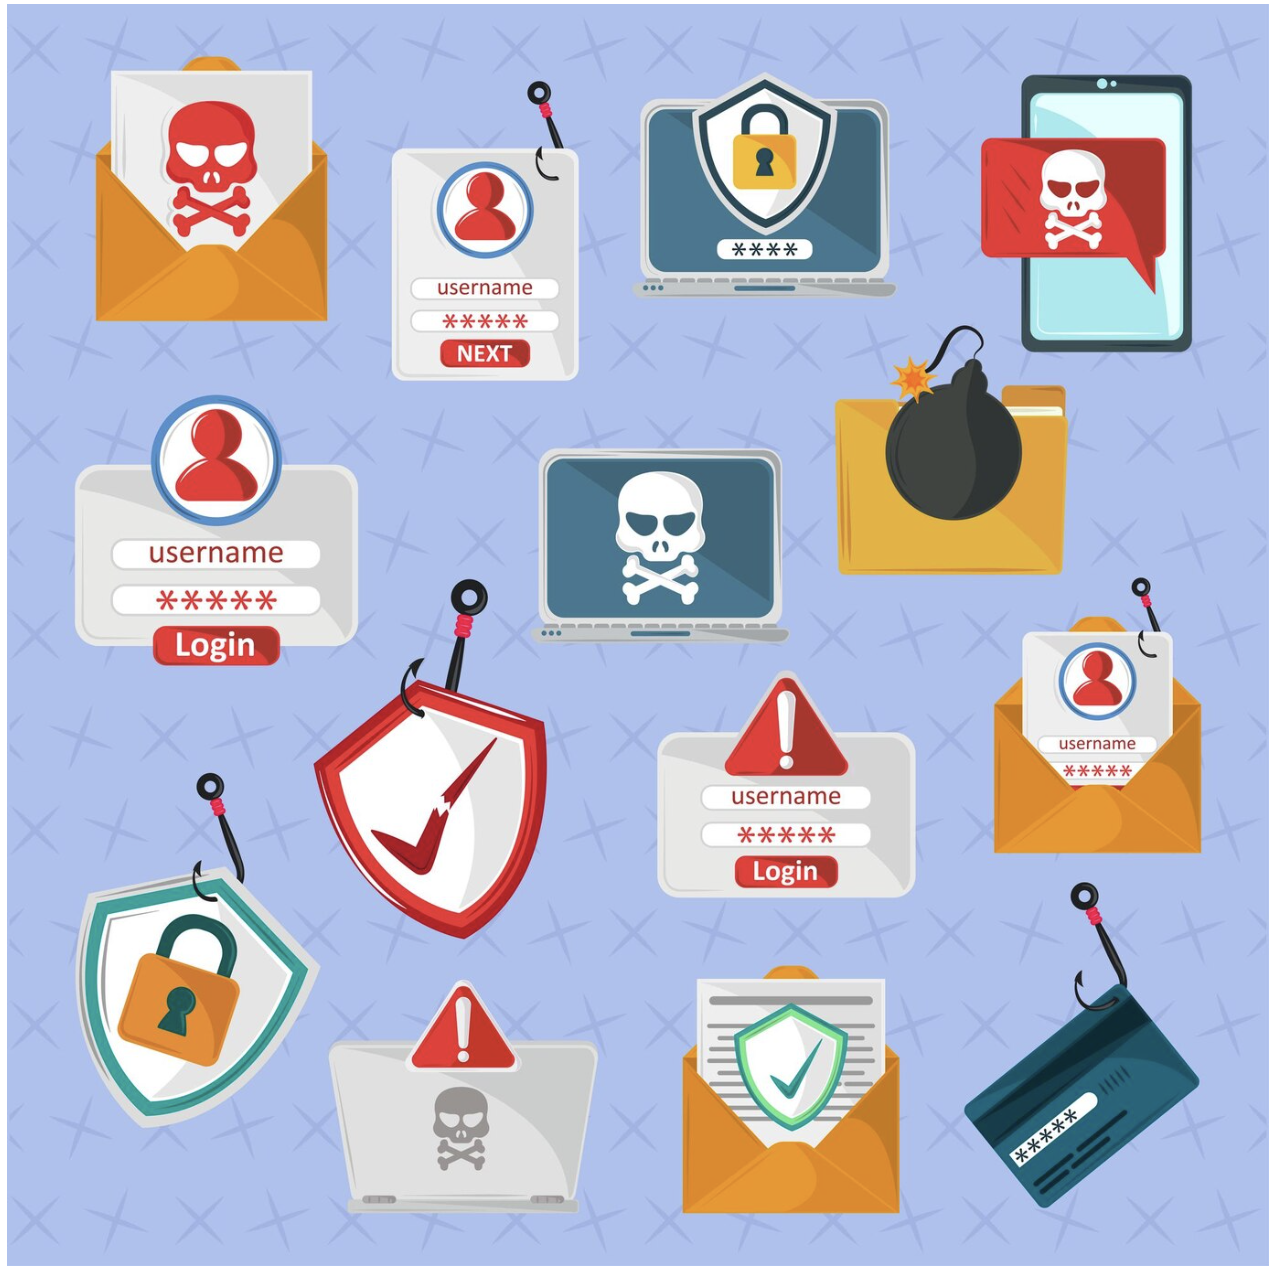 Email security best practices, email threat types